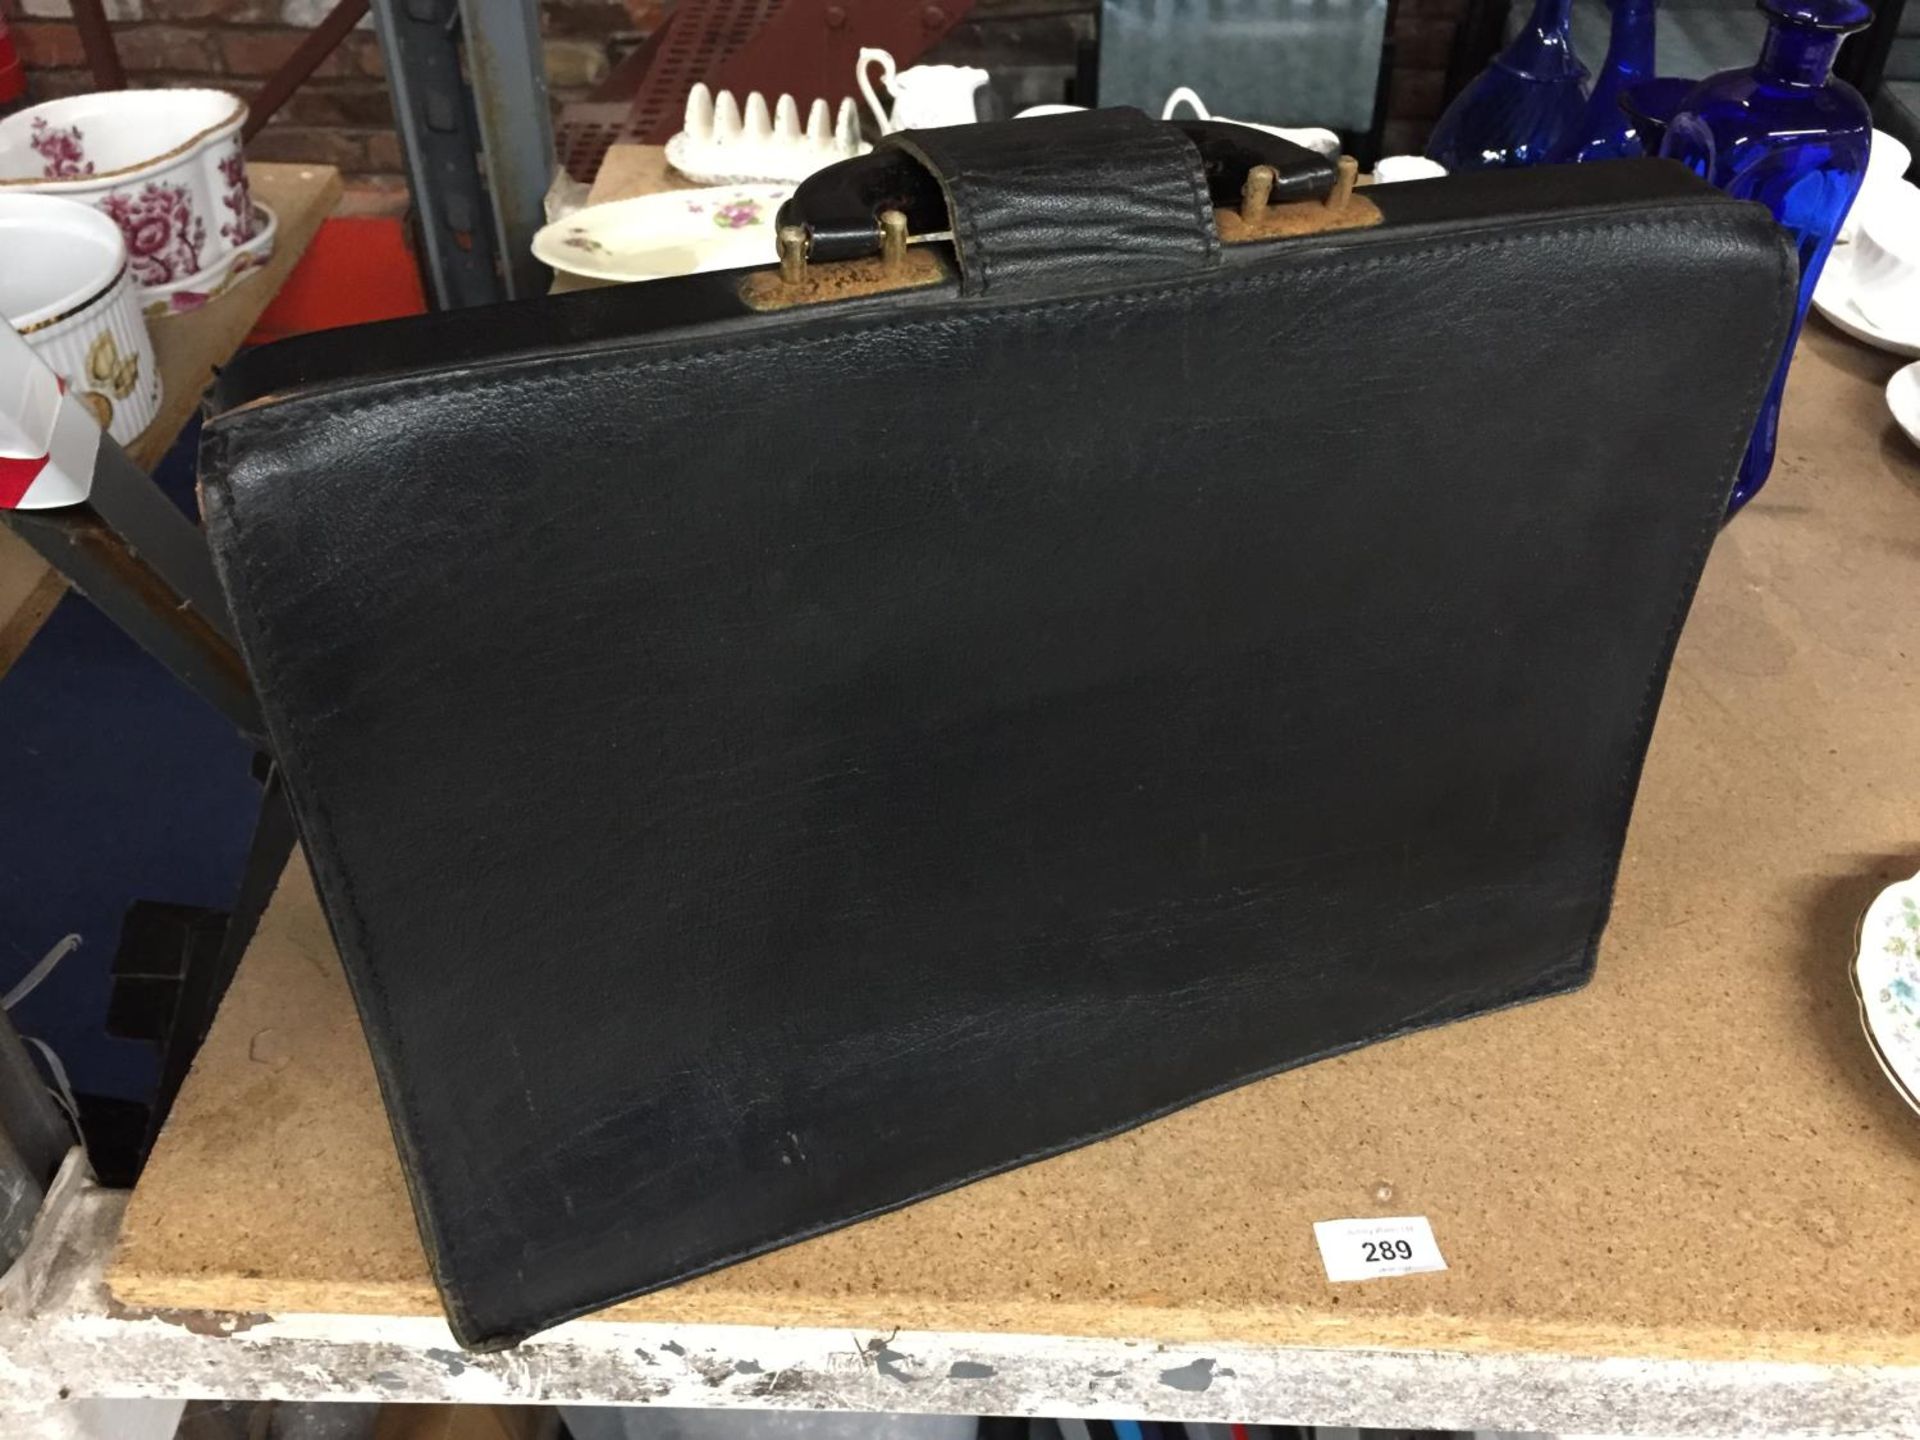 A VINTAGE BLACK LEATHER BRIEFCASE WITH CLASP FASTENING - Image 2 of 4